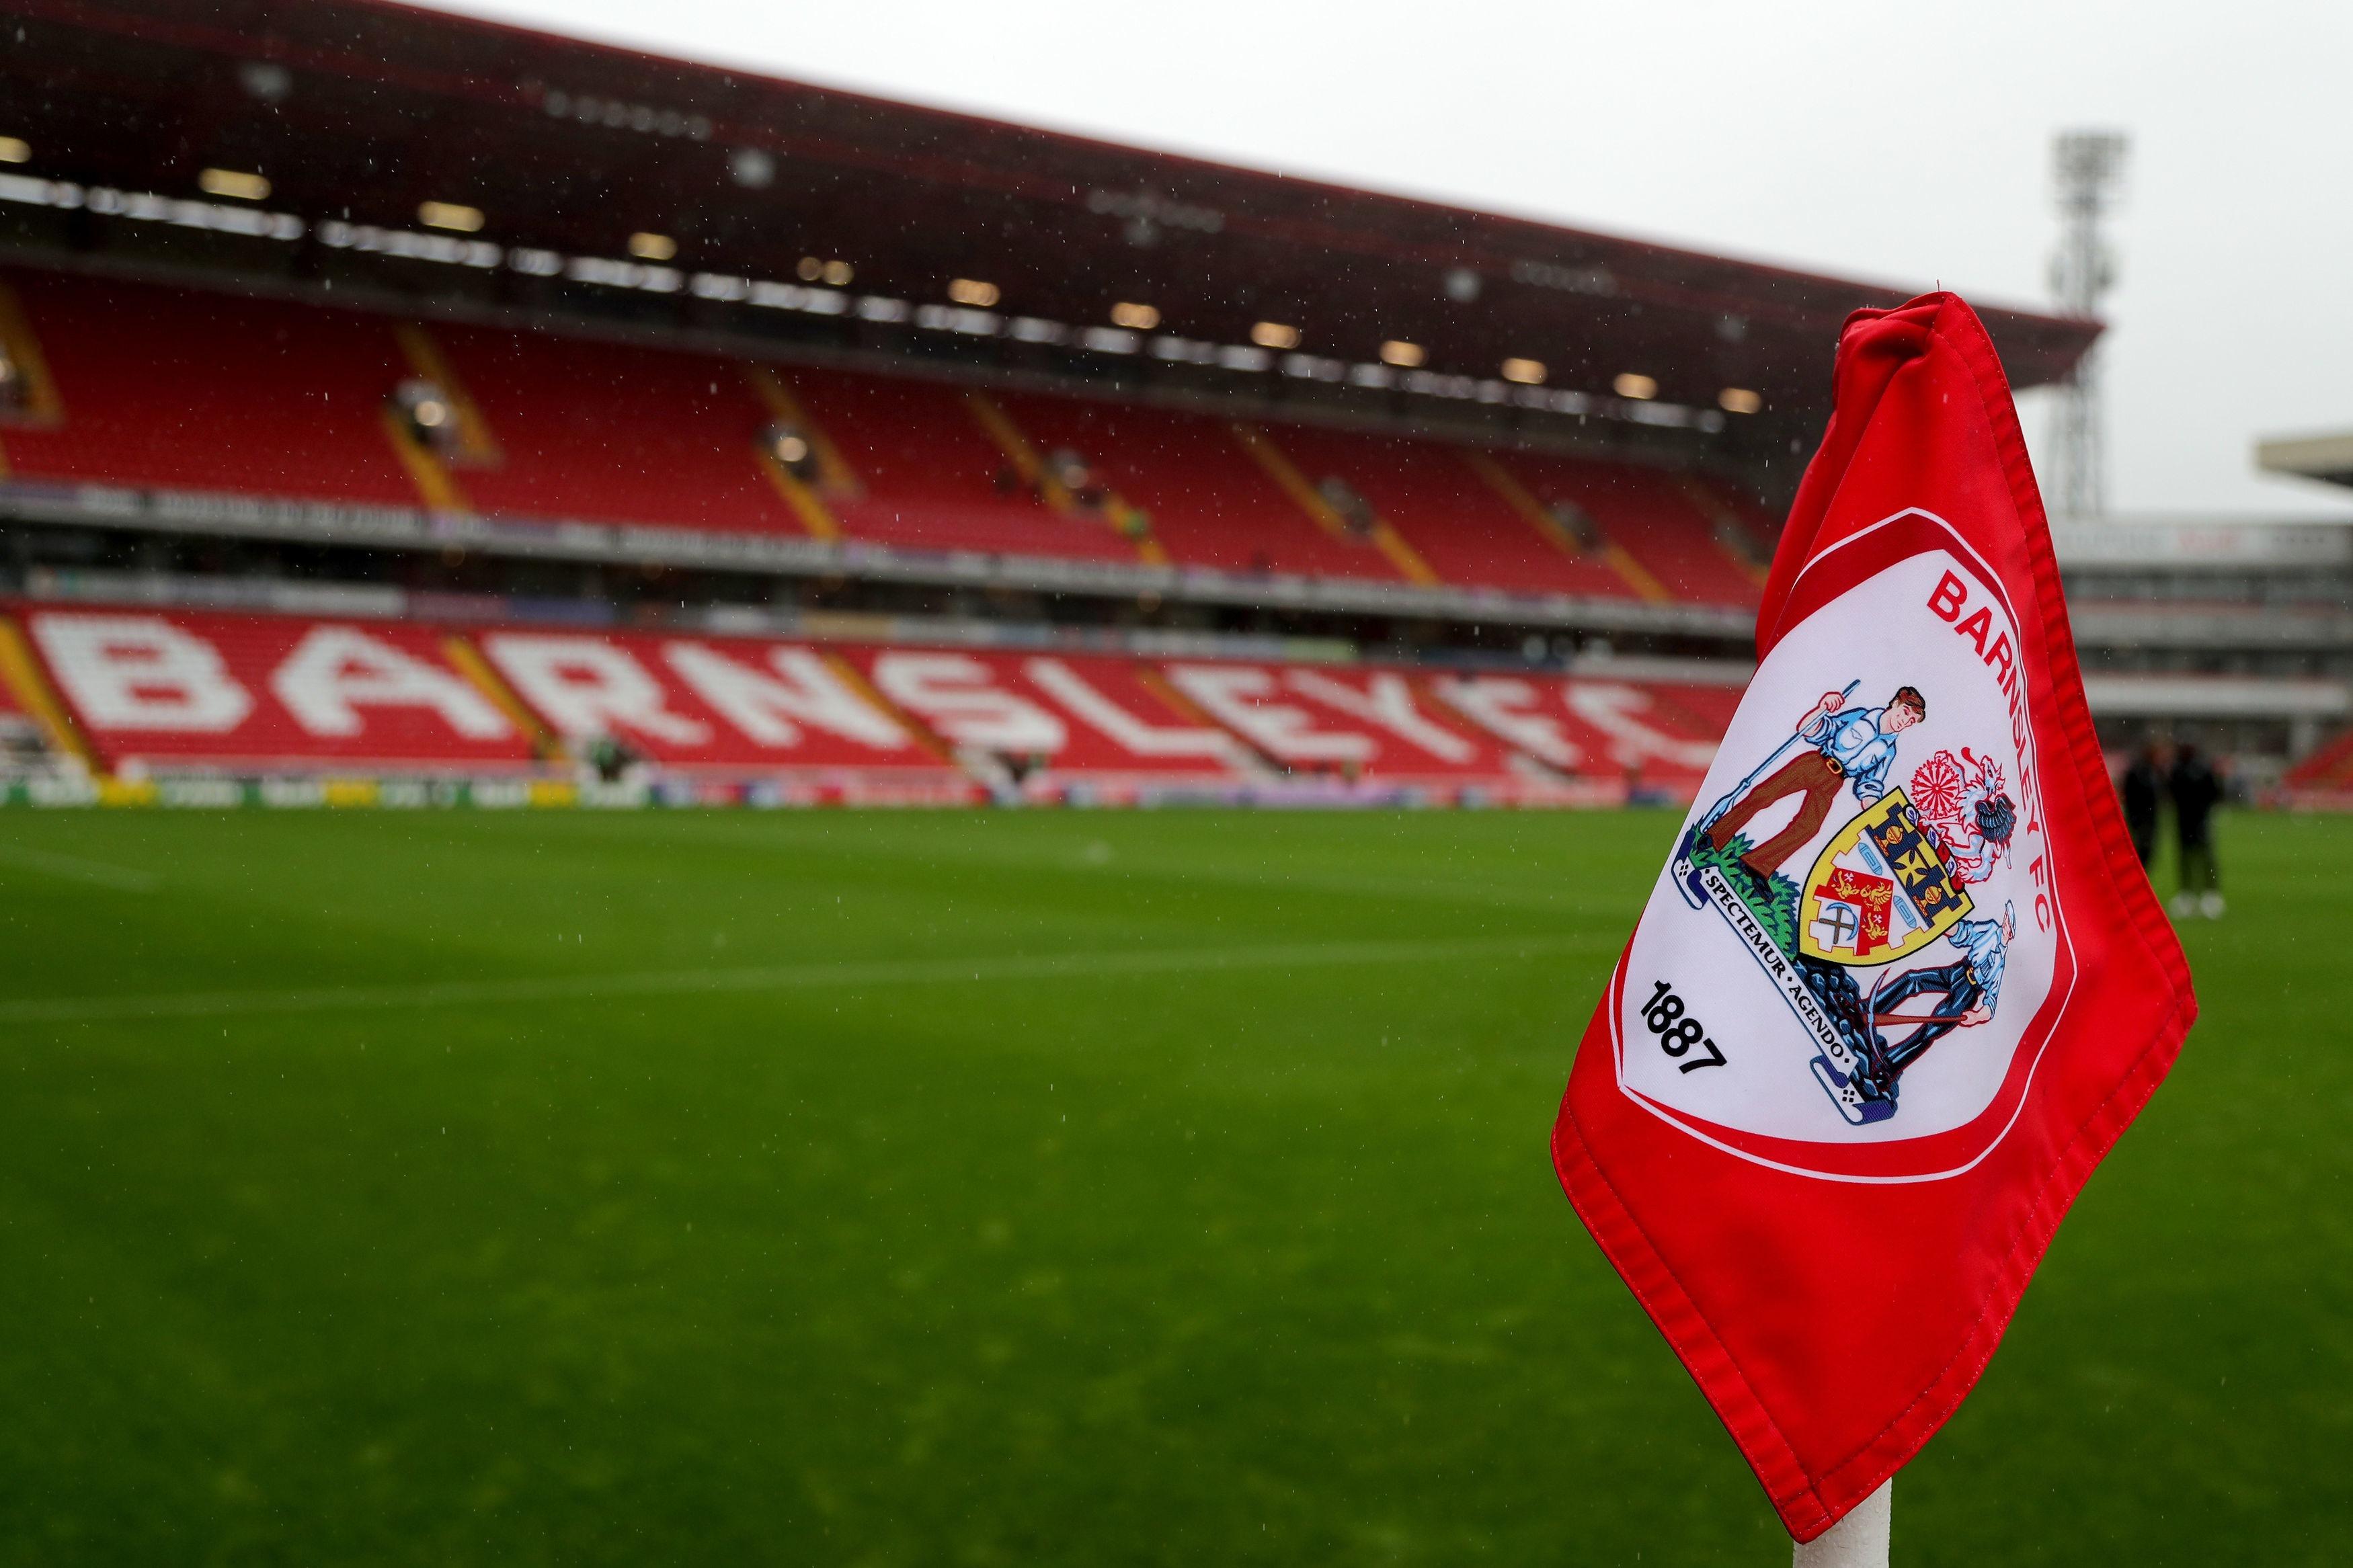 Barnsley Fc In Tribute After Supporter Dies During Game At Oakwell The Star